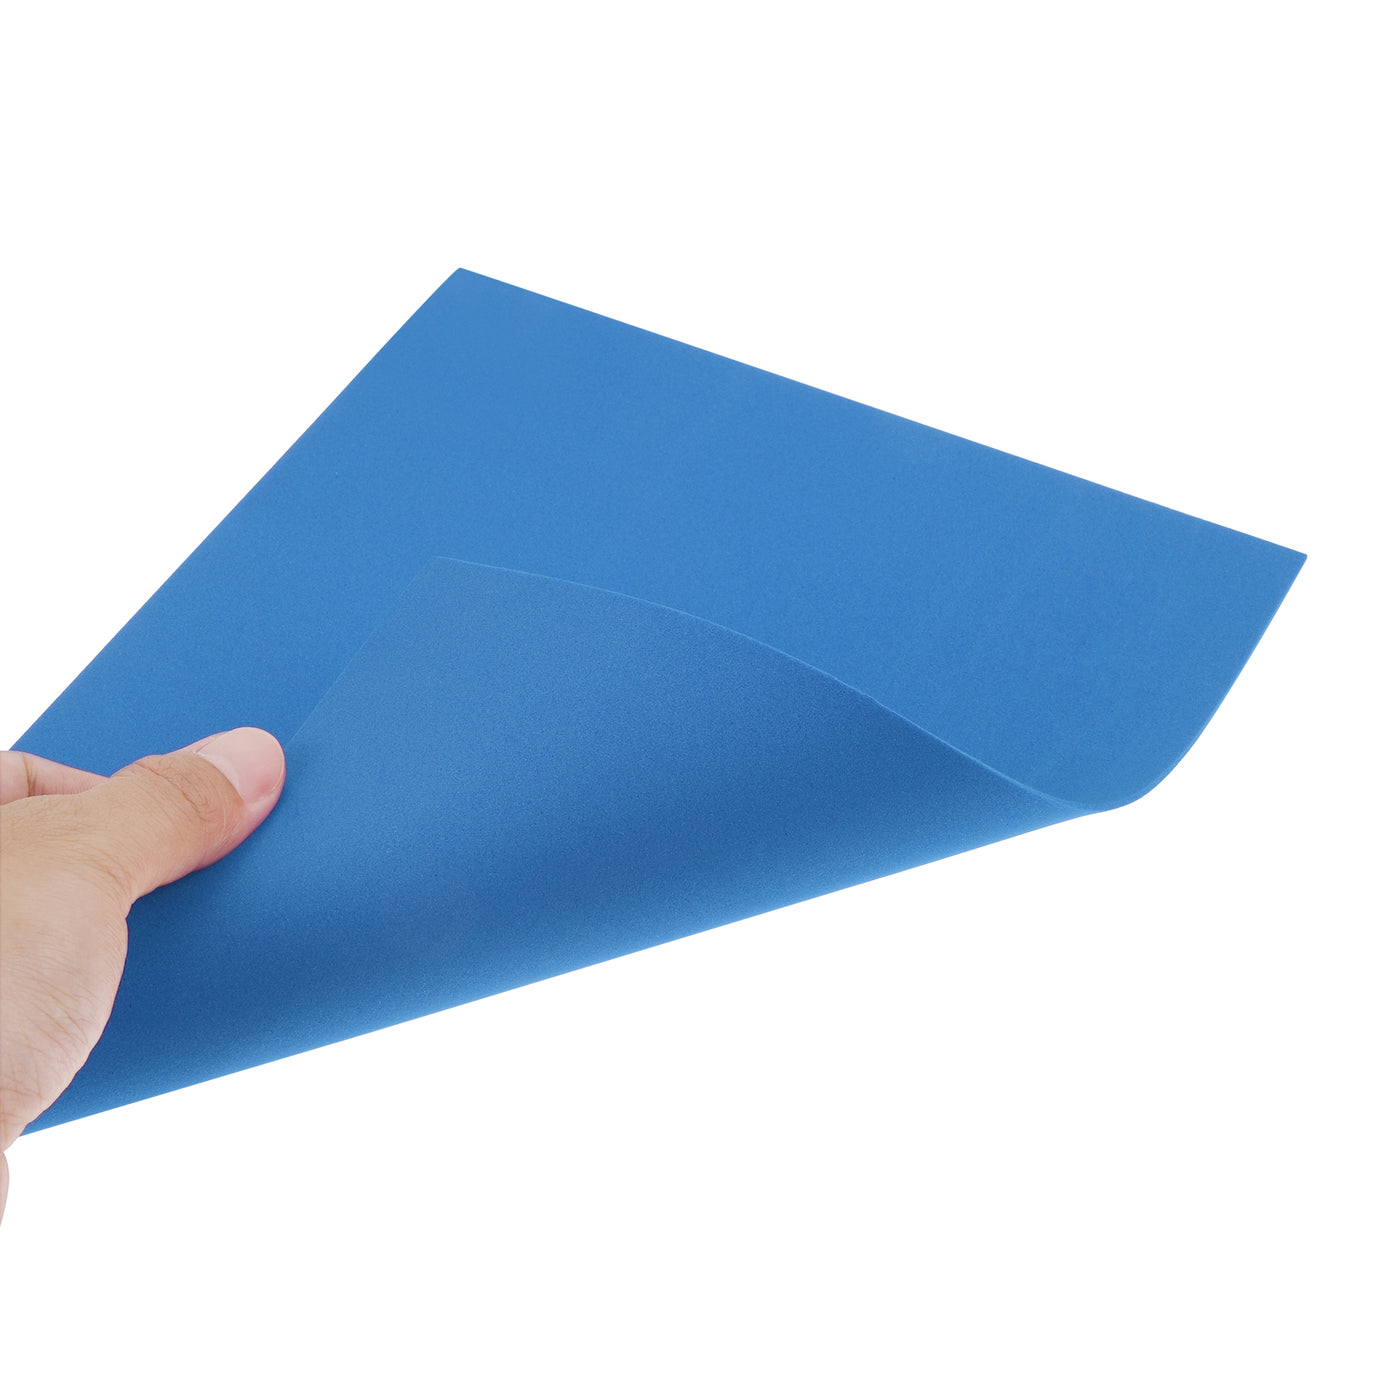 Uxcell Uxcell Light Blue EVA Foam Sheets 11 x 8 inch 1.7mm Thickness for Crafts DIY 6 Pcs